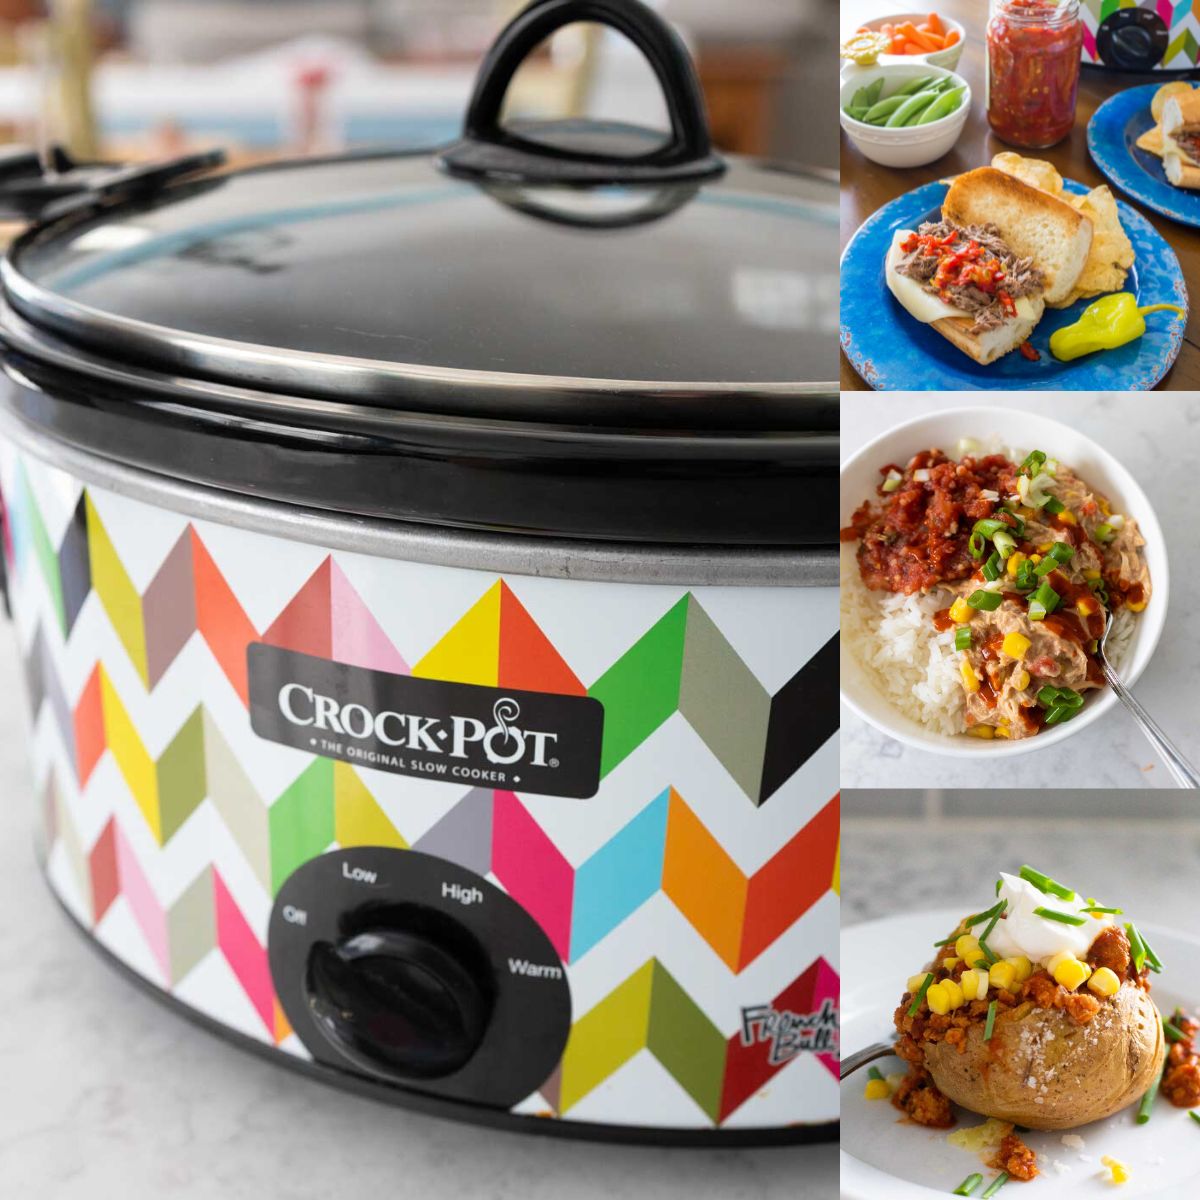 The photo collage shows a Crock Pot next to 3 photos of easy recipes.